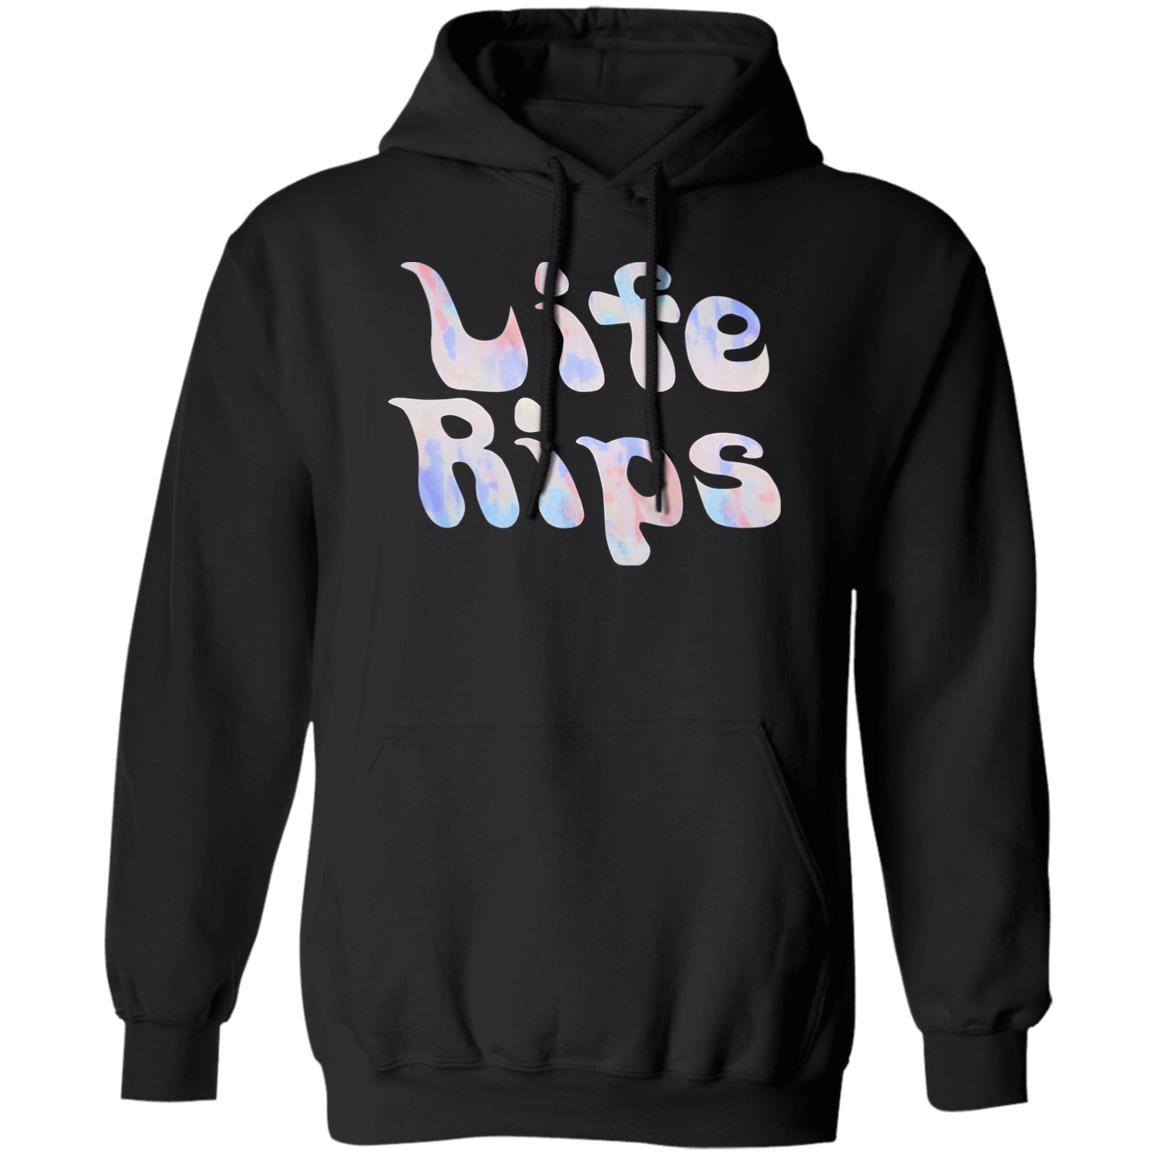 Life Rips Hoodie
#LifeRipsHoodie #USFashion #HoodieSeason #StreetwearVibes #TrendyThreads #AmericanStyle #FashionFaves #CozyStyle #HoodieLife #MustHaveFashion #UrbanApparel #PopularStreetwear

tipatee.com/product/life-r…